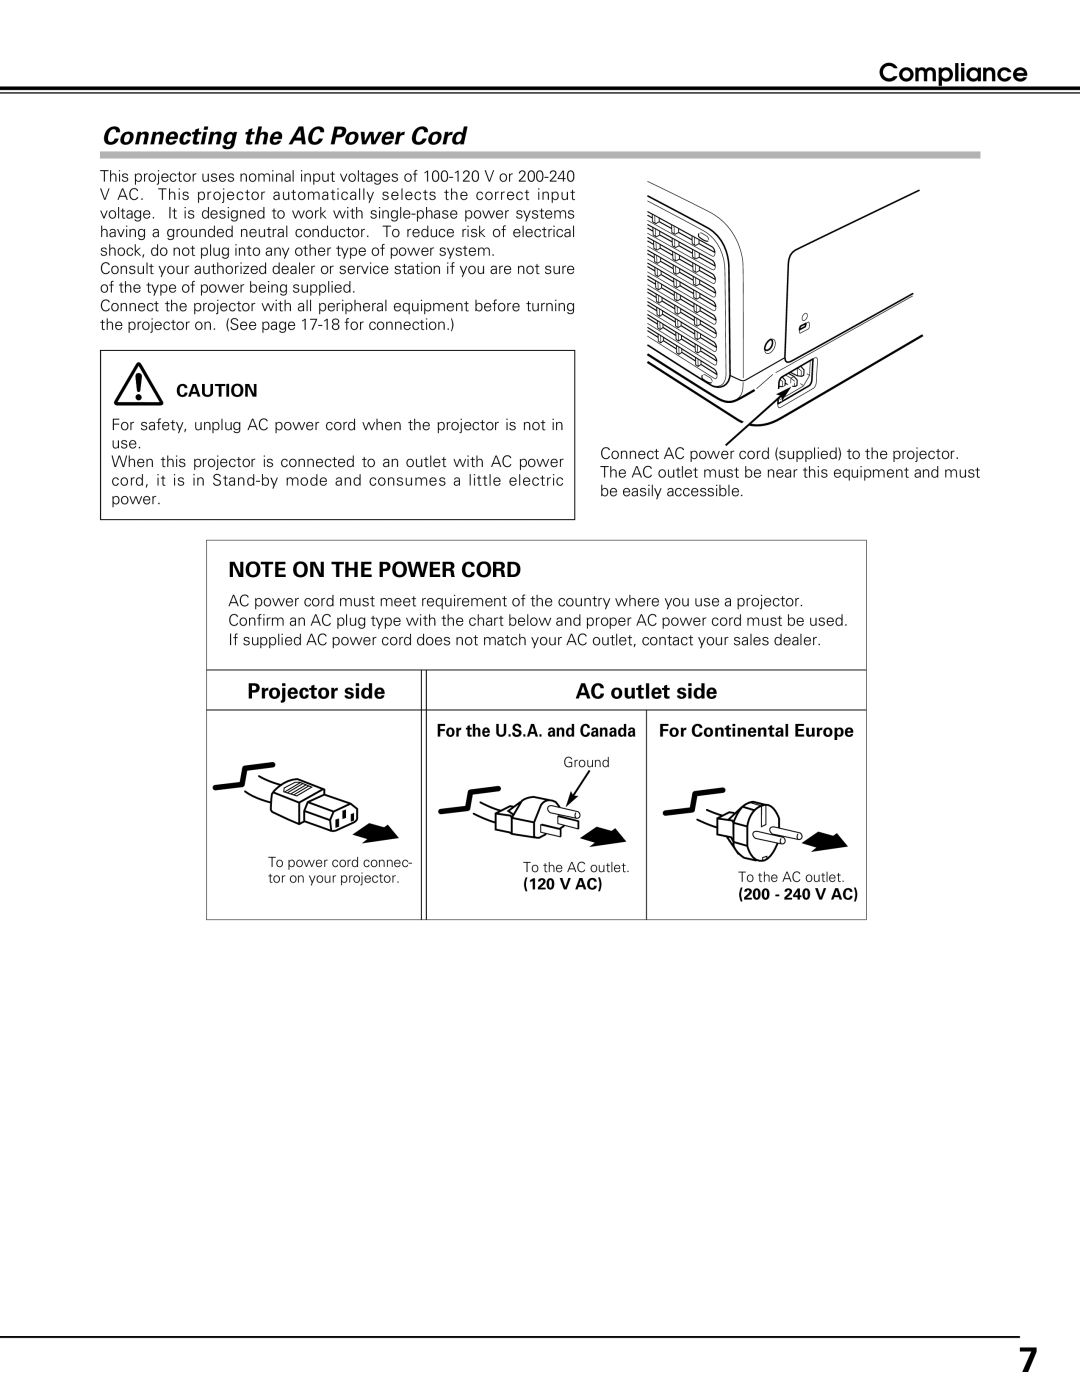 Eiki LC-XE10 instruction manual Compliance, Connecting the AC Power Cord, For the U.S.A. and Canada, V Ac, 200 - 240 V AC 